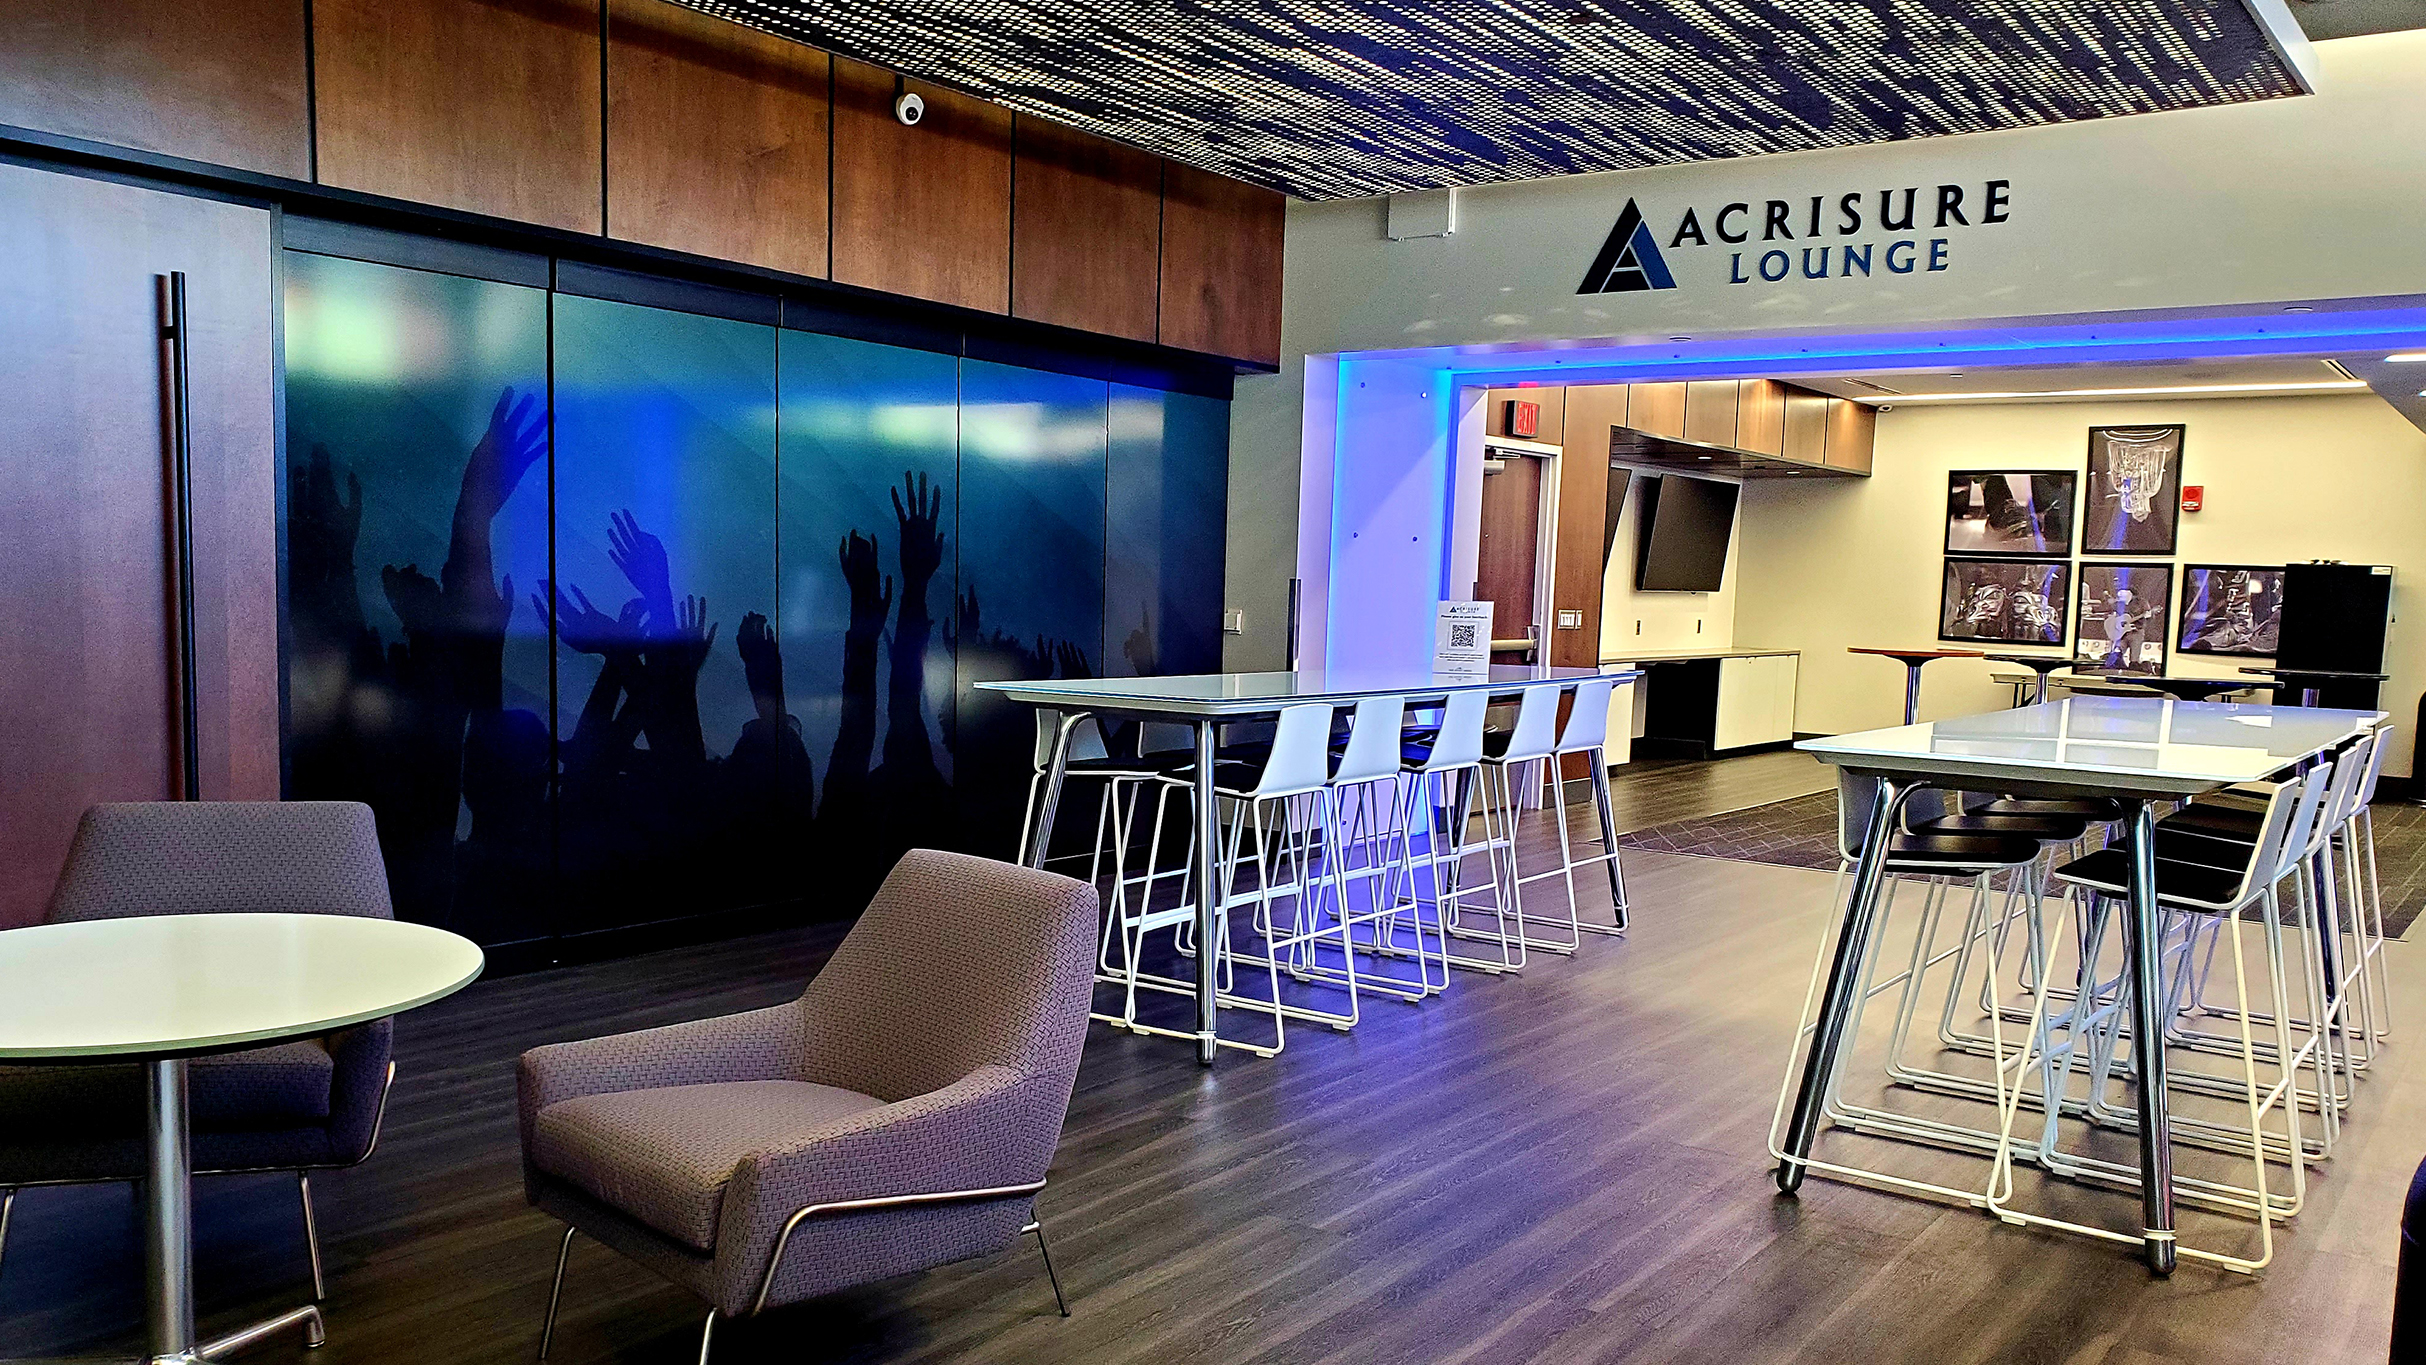 Acrisure Lounge: Phish Pre-show VIP Access-Not An Event Ticket